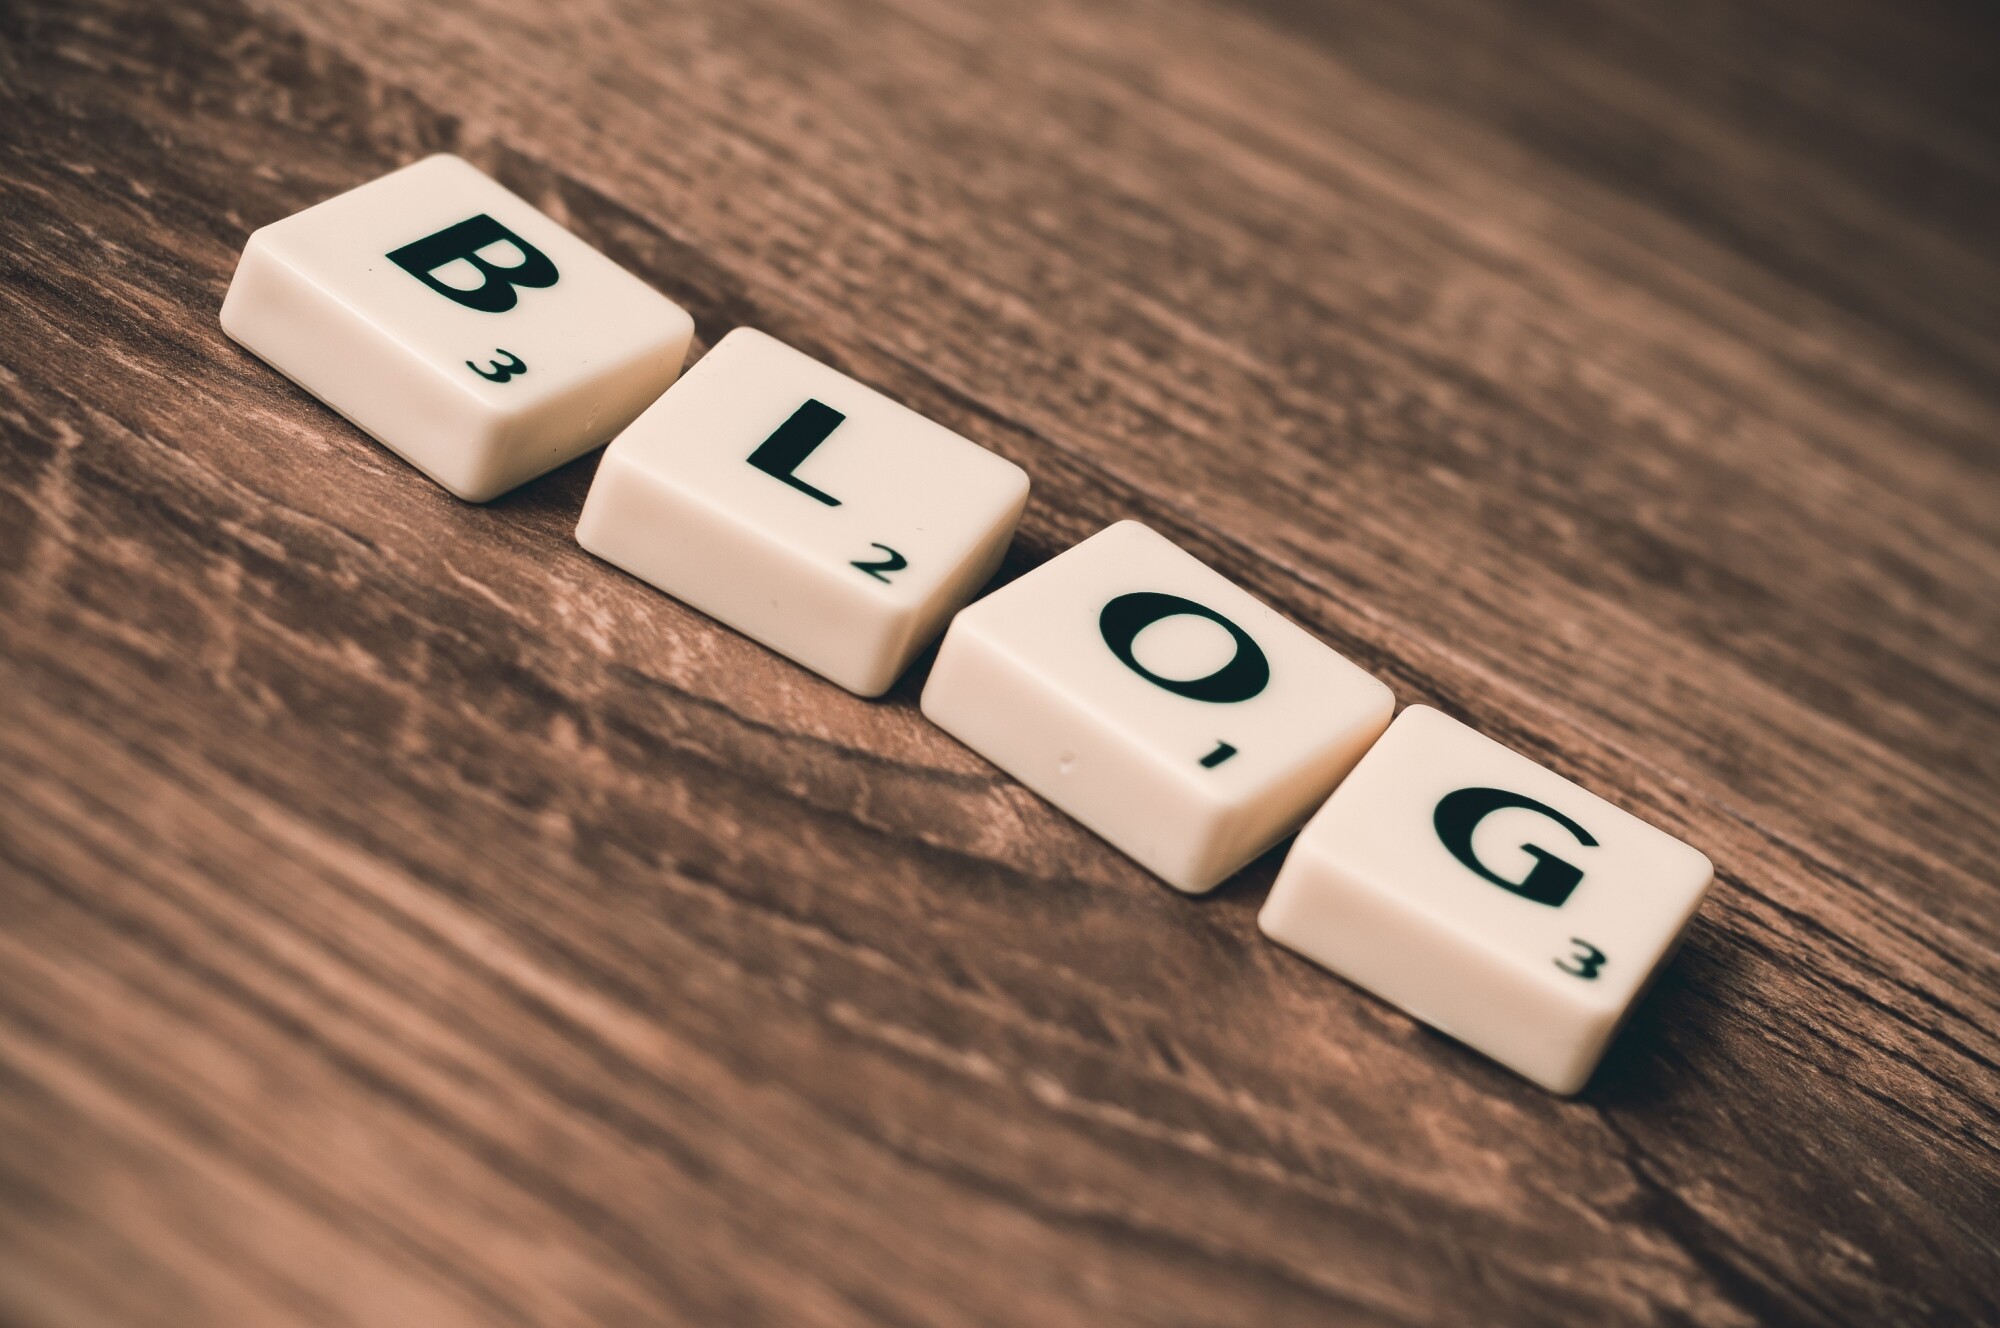 Blog Strategies for Small Businesses